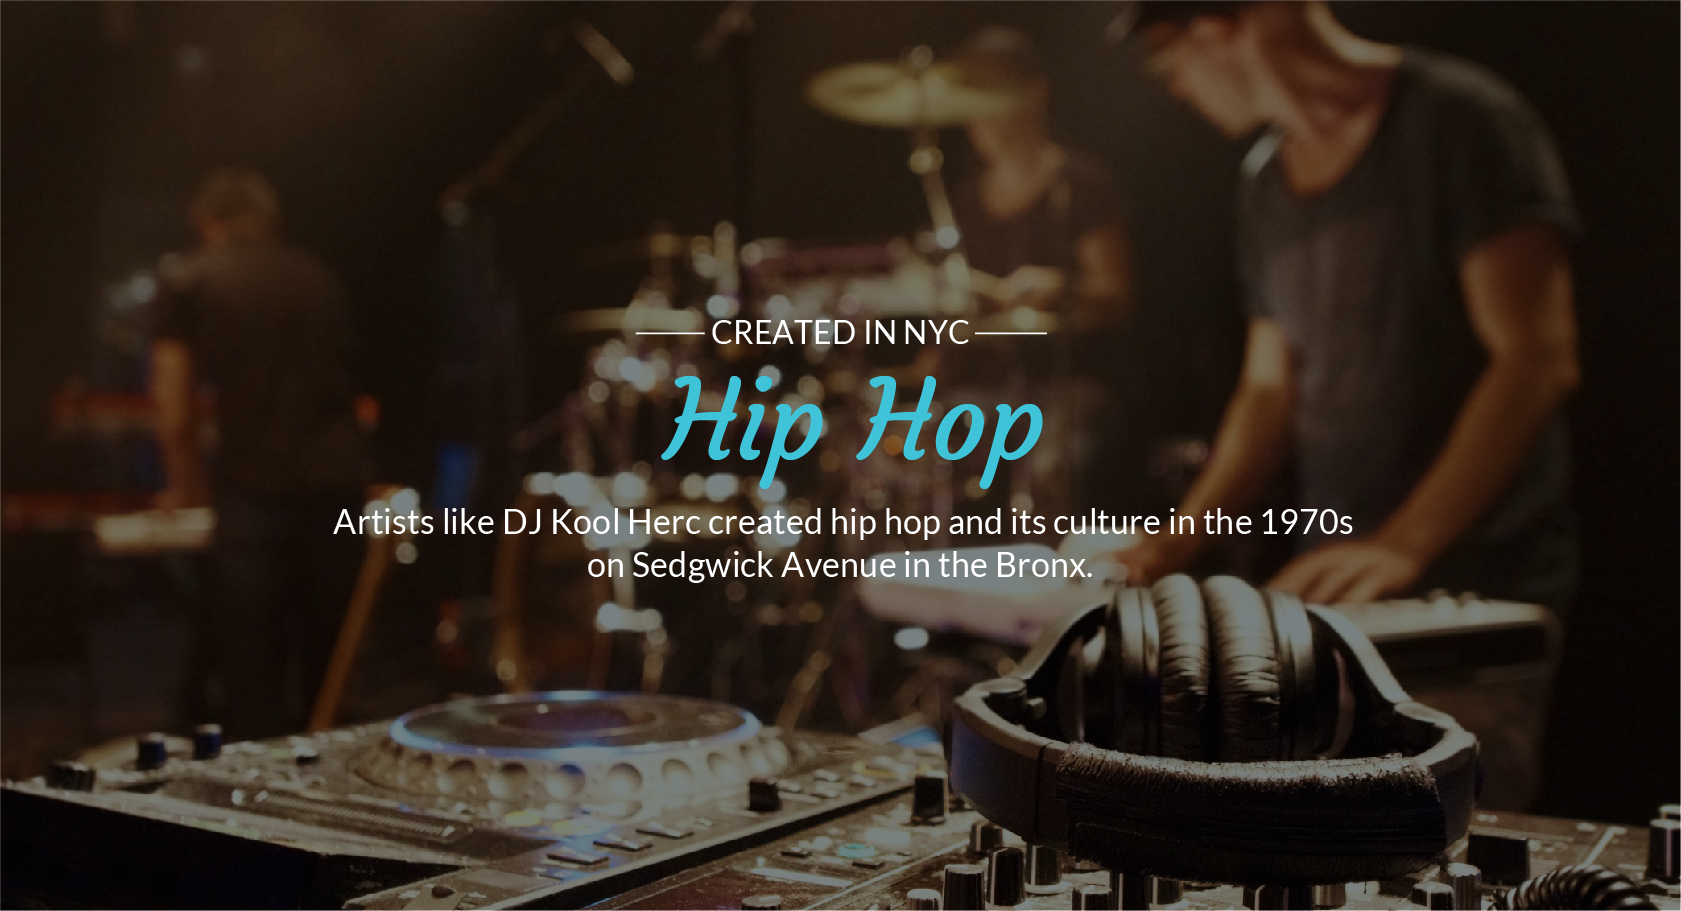 Created in NYC, Hip Hop